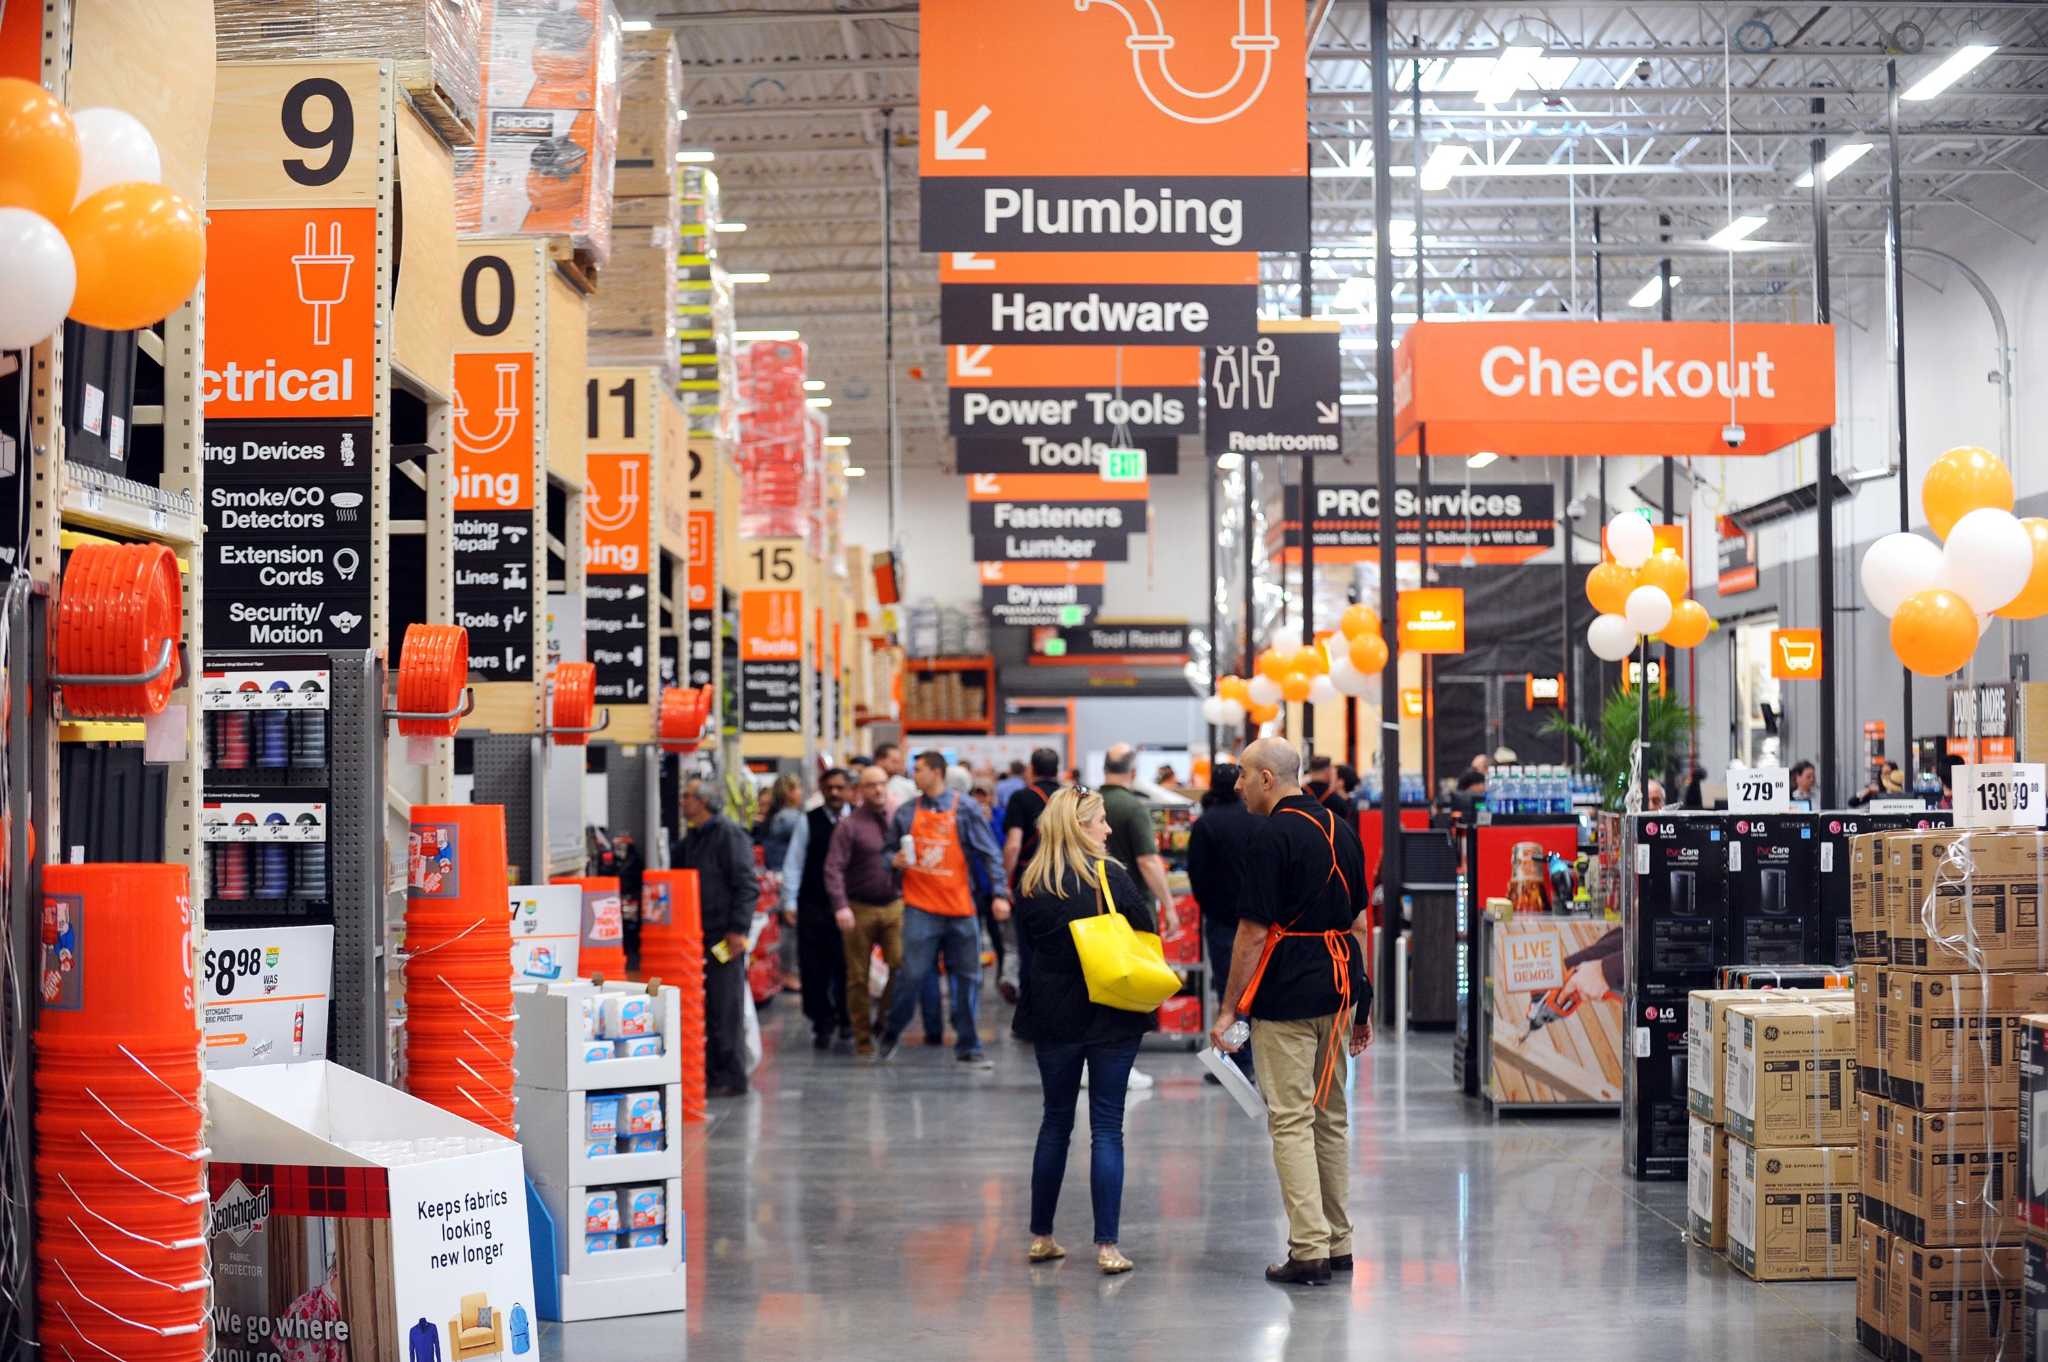 The Home Depot set to open new store in Maspeth –